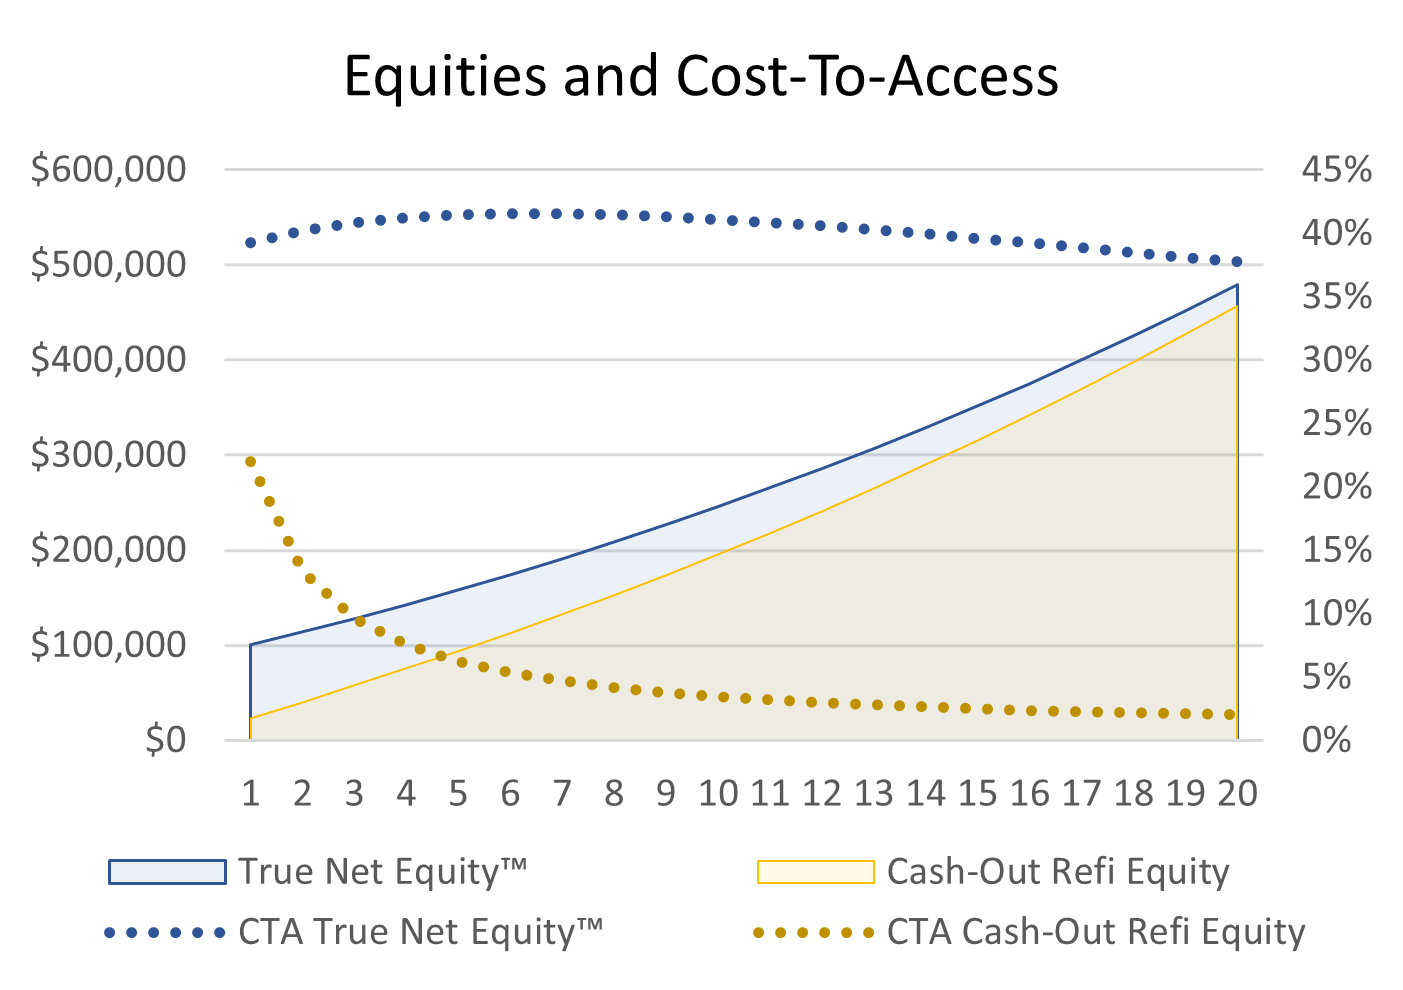 9 - Equities and CTA - Years 1-20